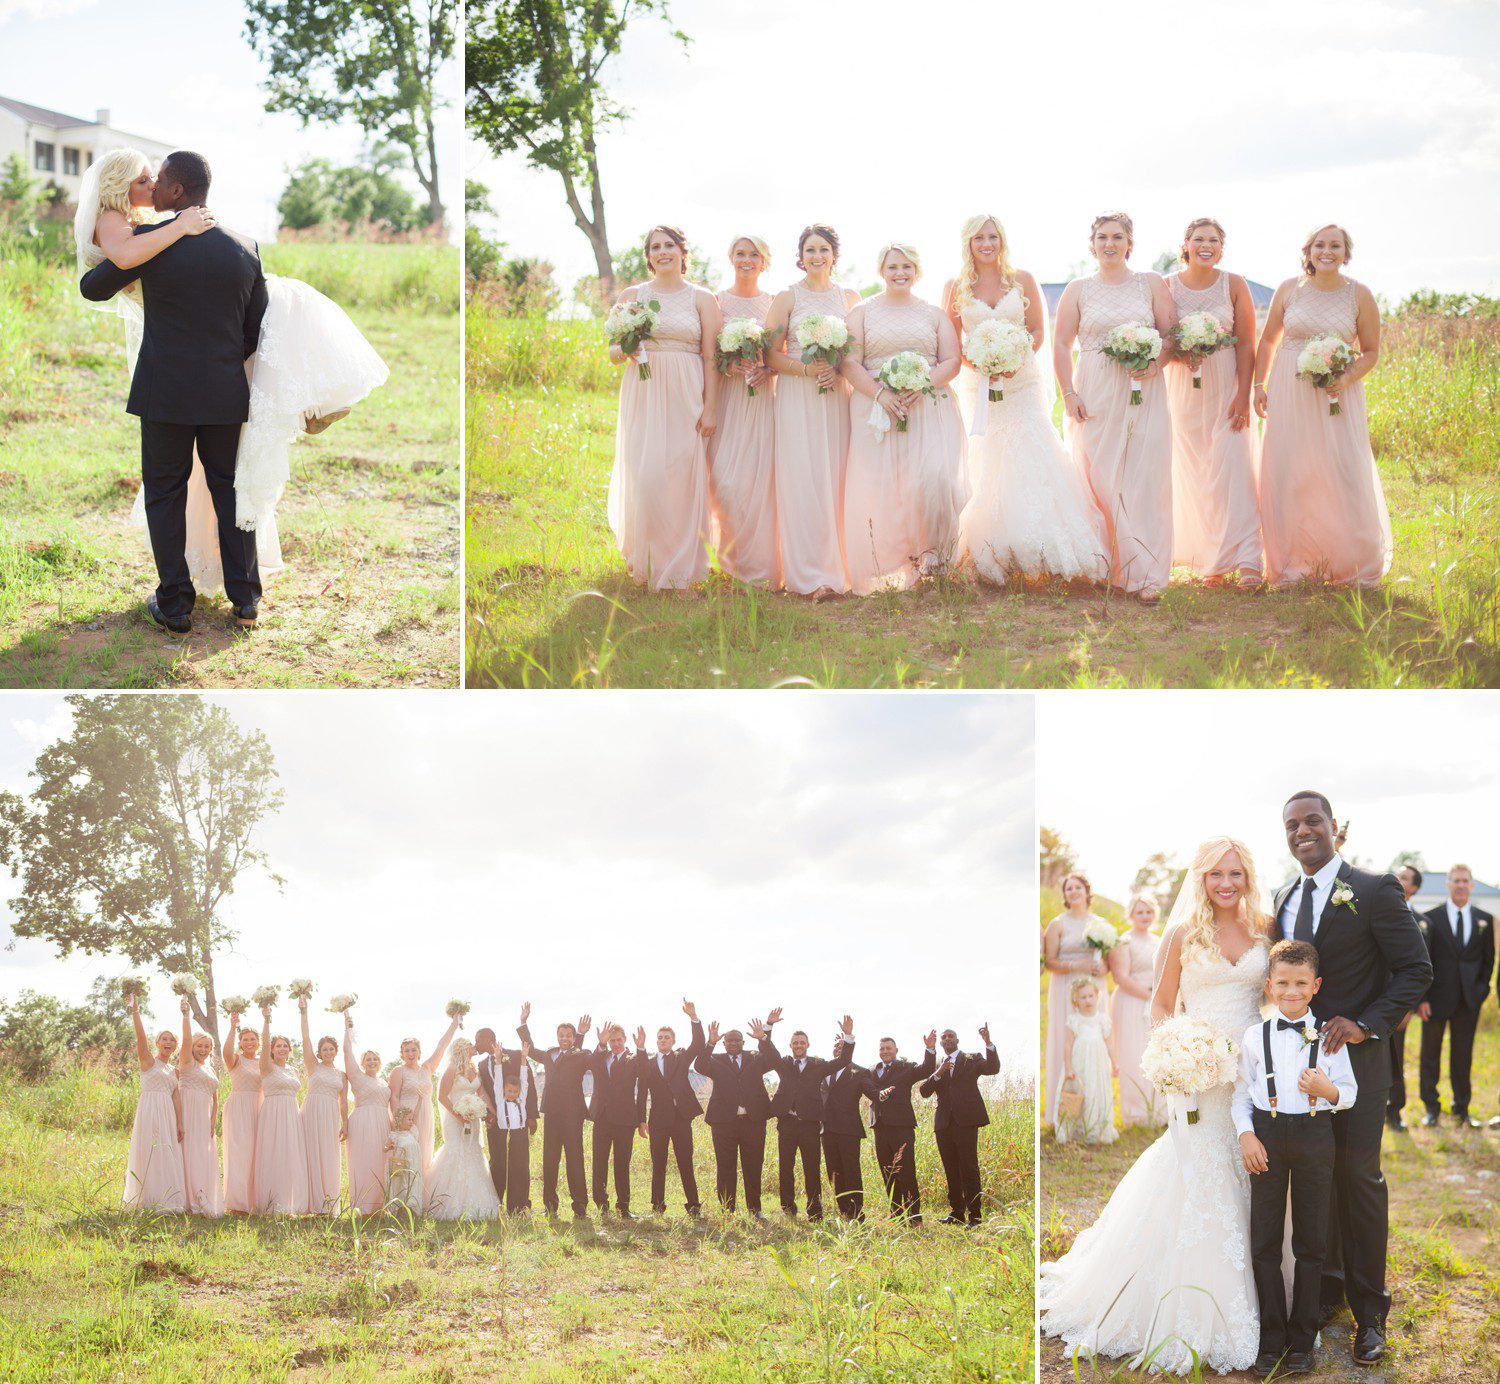 Photos of bridal party and bride and groom in field at Beautiful summer wedding at Foxland Harbor in Gallatin, TN overlooking Old Hickory Lake. Wedding photos by Krista Lee Photography